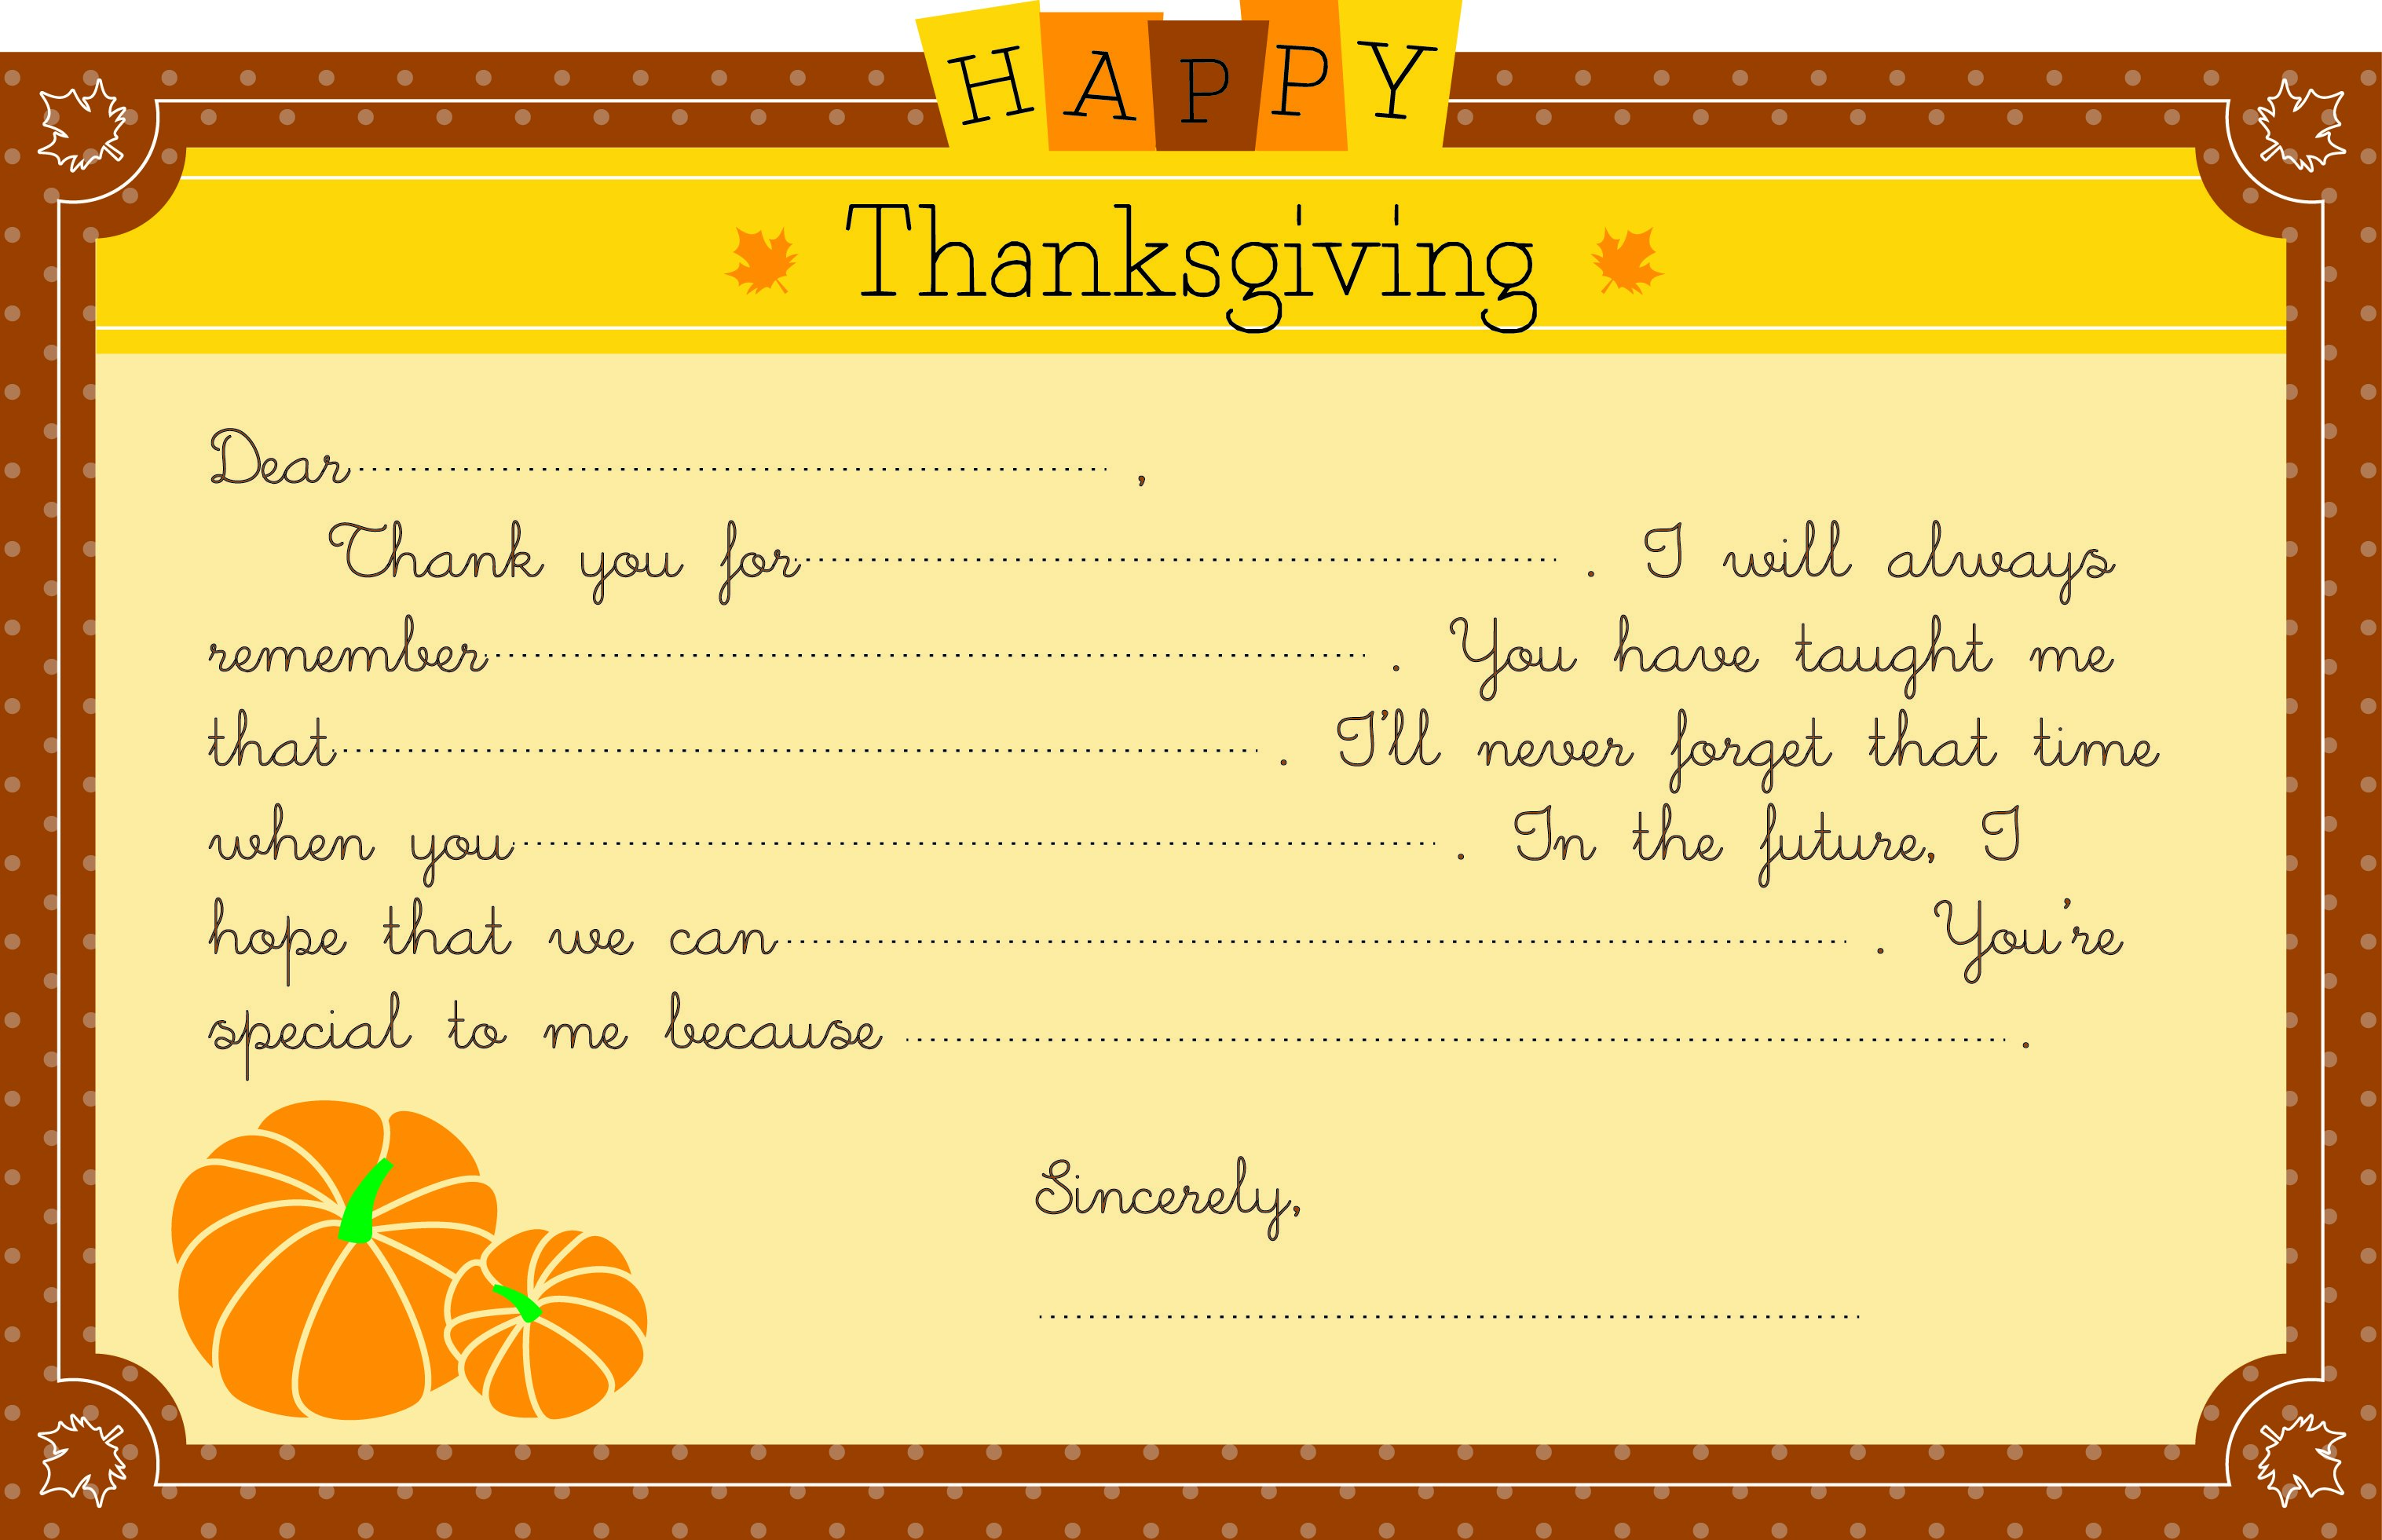 Make Your Own Thanksgiving Card